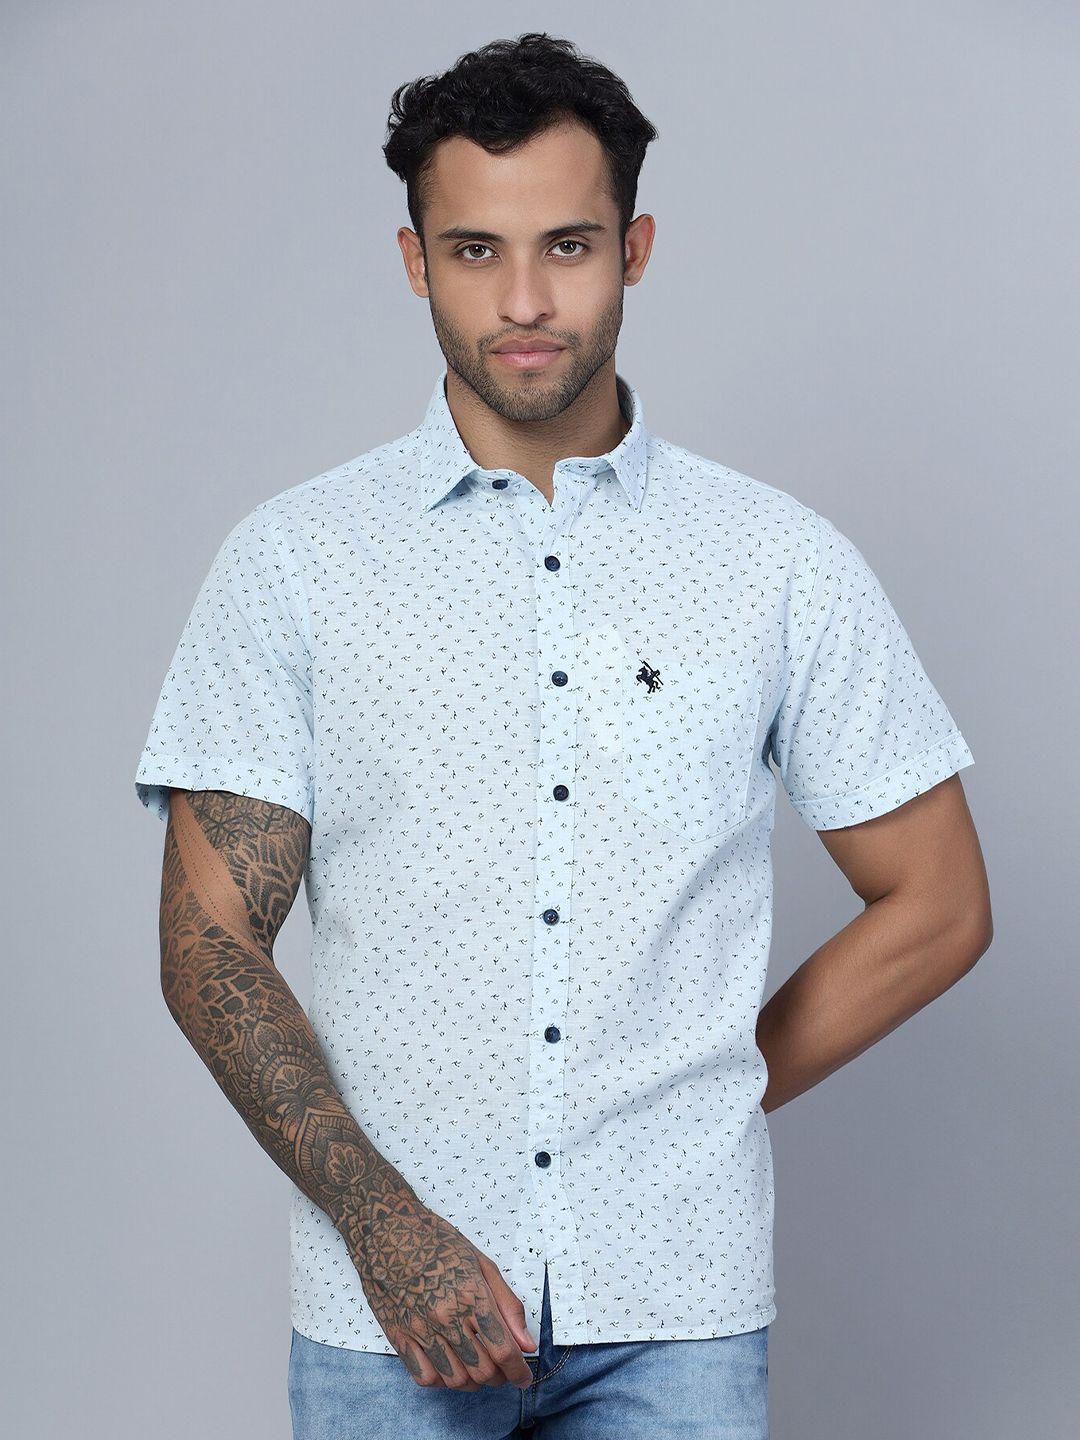 cantabil smart floral printed spread collar cotton casual shirt